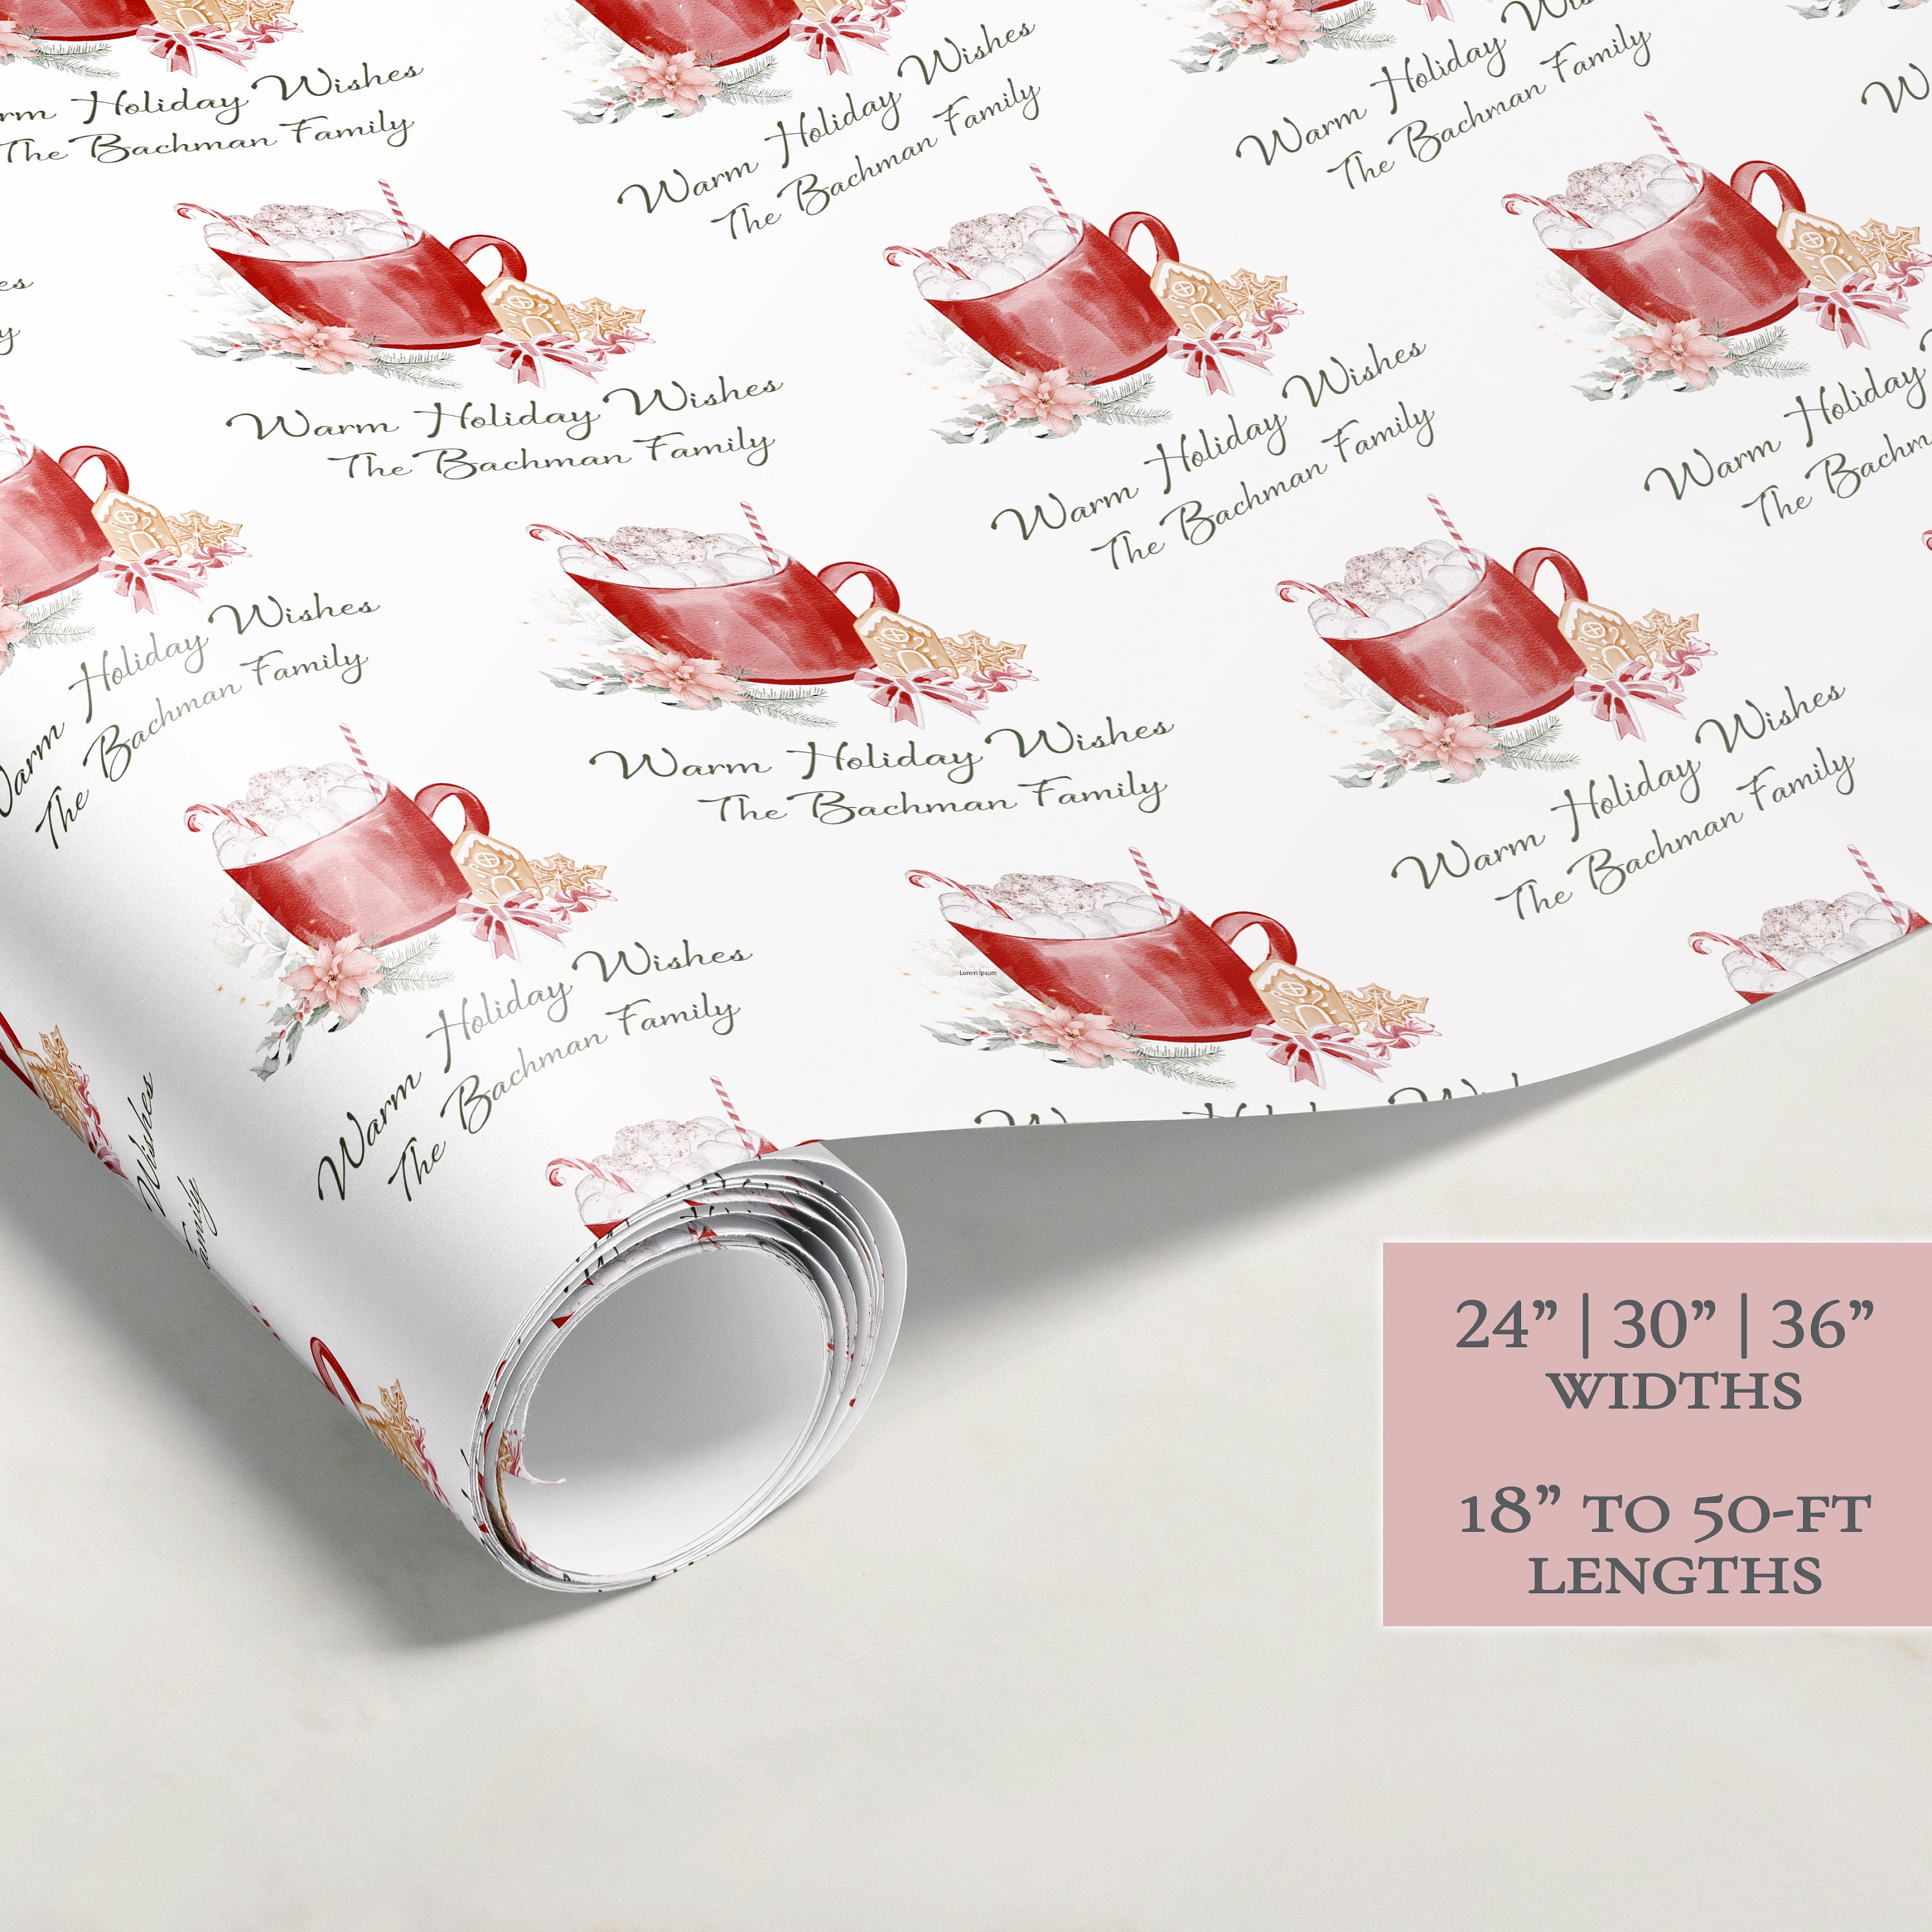 Christmas Wrapping Paper | Personalized Wrapping Paper | Personalized Gift | Custom Gift Wrap | Name Wrapping Paper | Hot Cocoa and Cookies